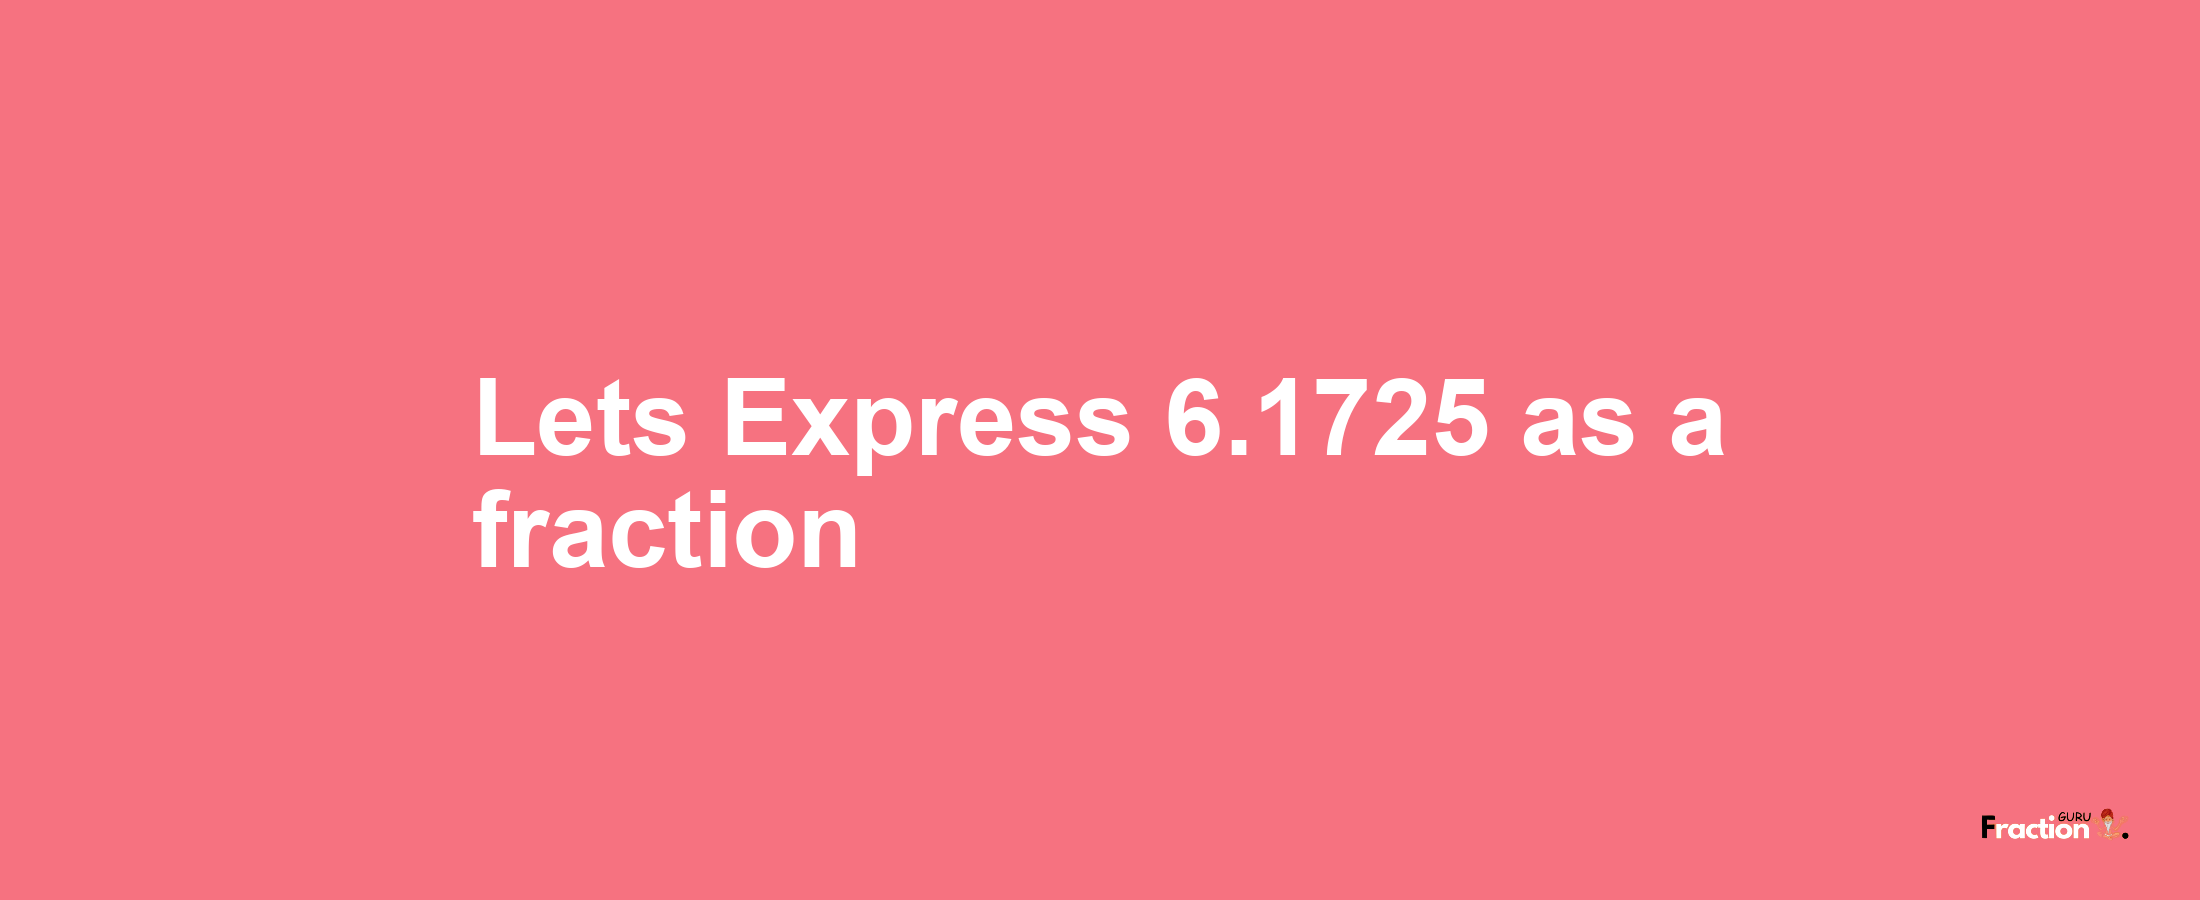 Lets Express 6.1725 as afraction